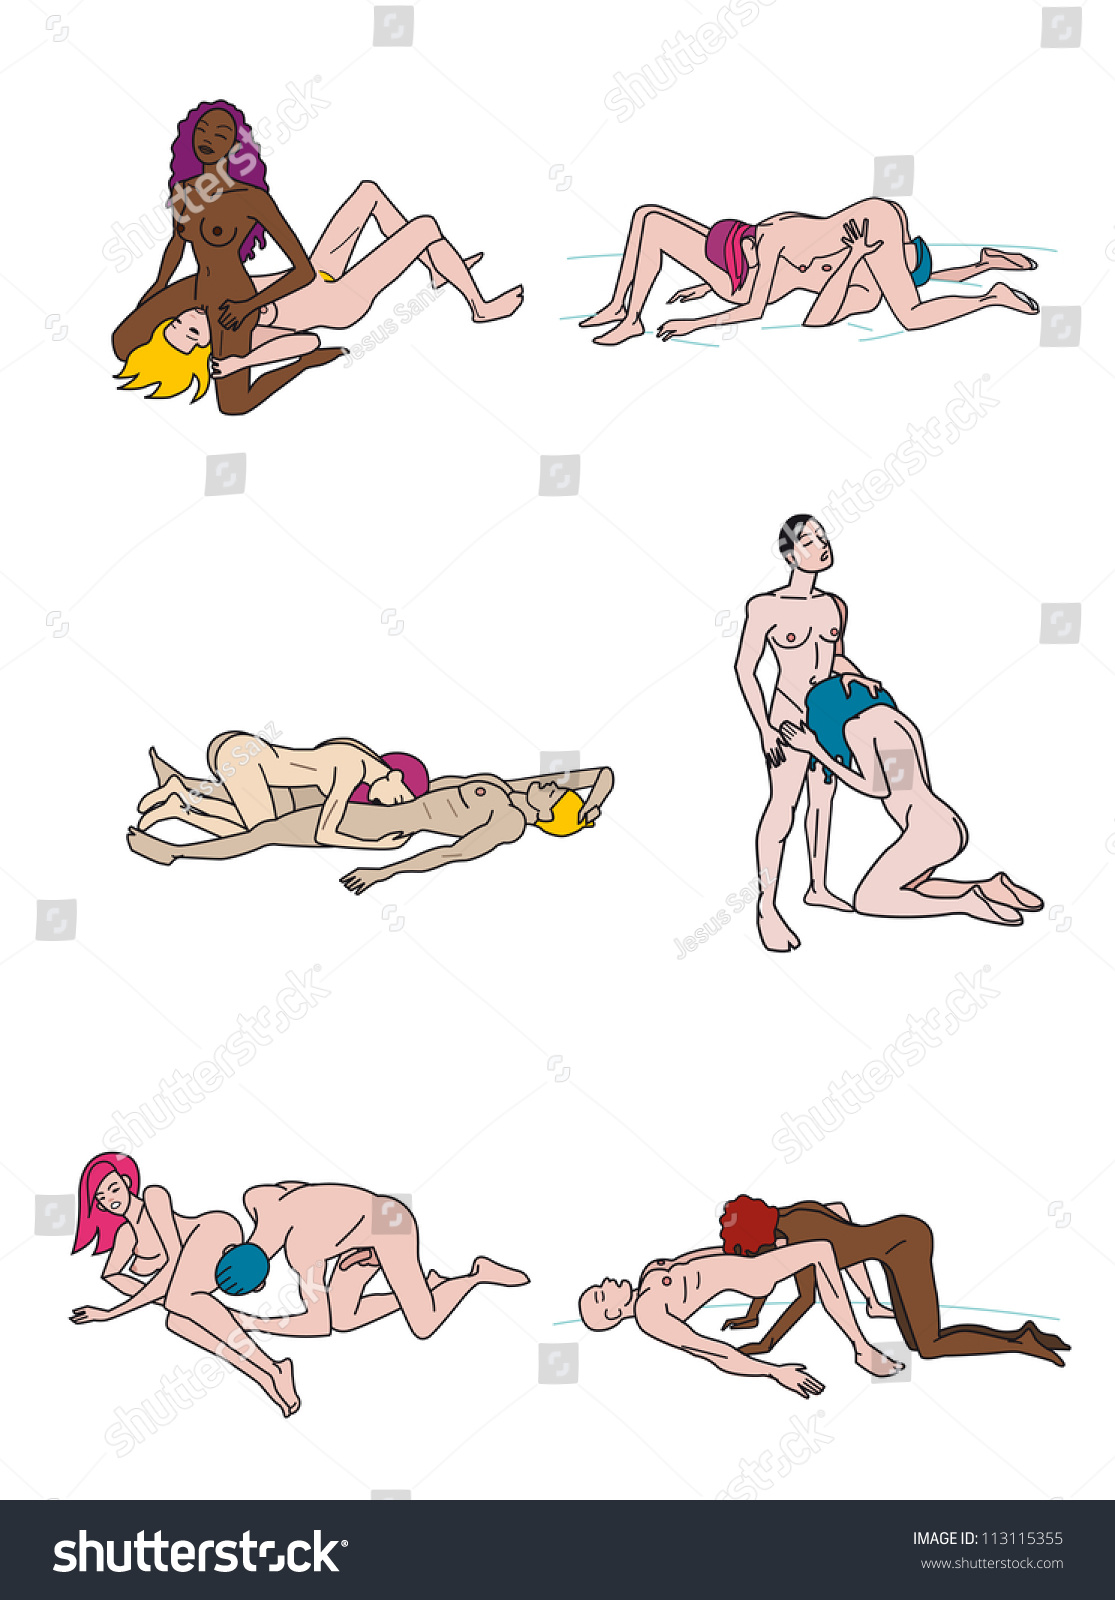 How To Have Sex In Different Positions 86